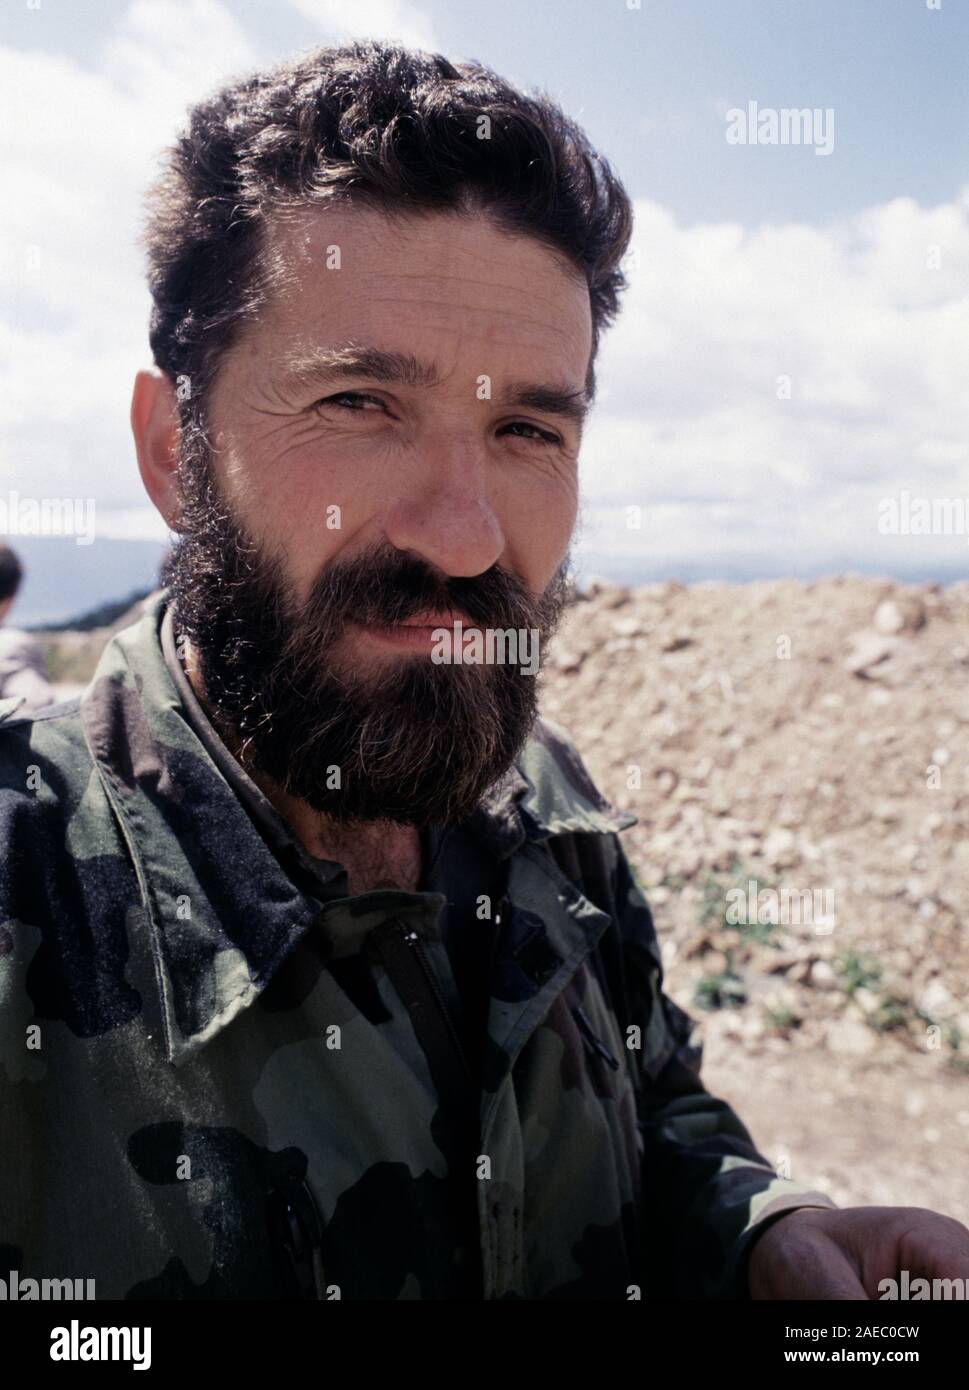 11th August 1993 During the Siege of Sarajevo: portrait of a Bosnian-Serb soldier on Mount Trebevic, above Sarajevo. Stock Photo